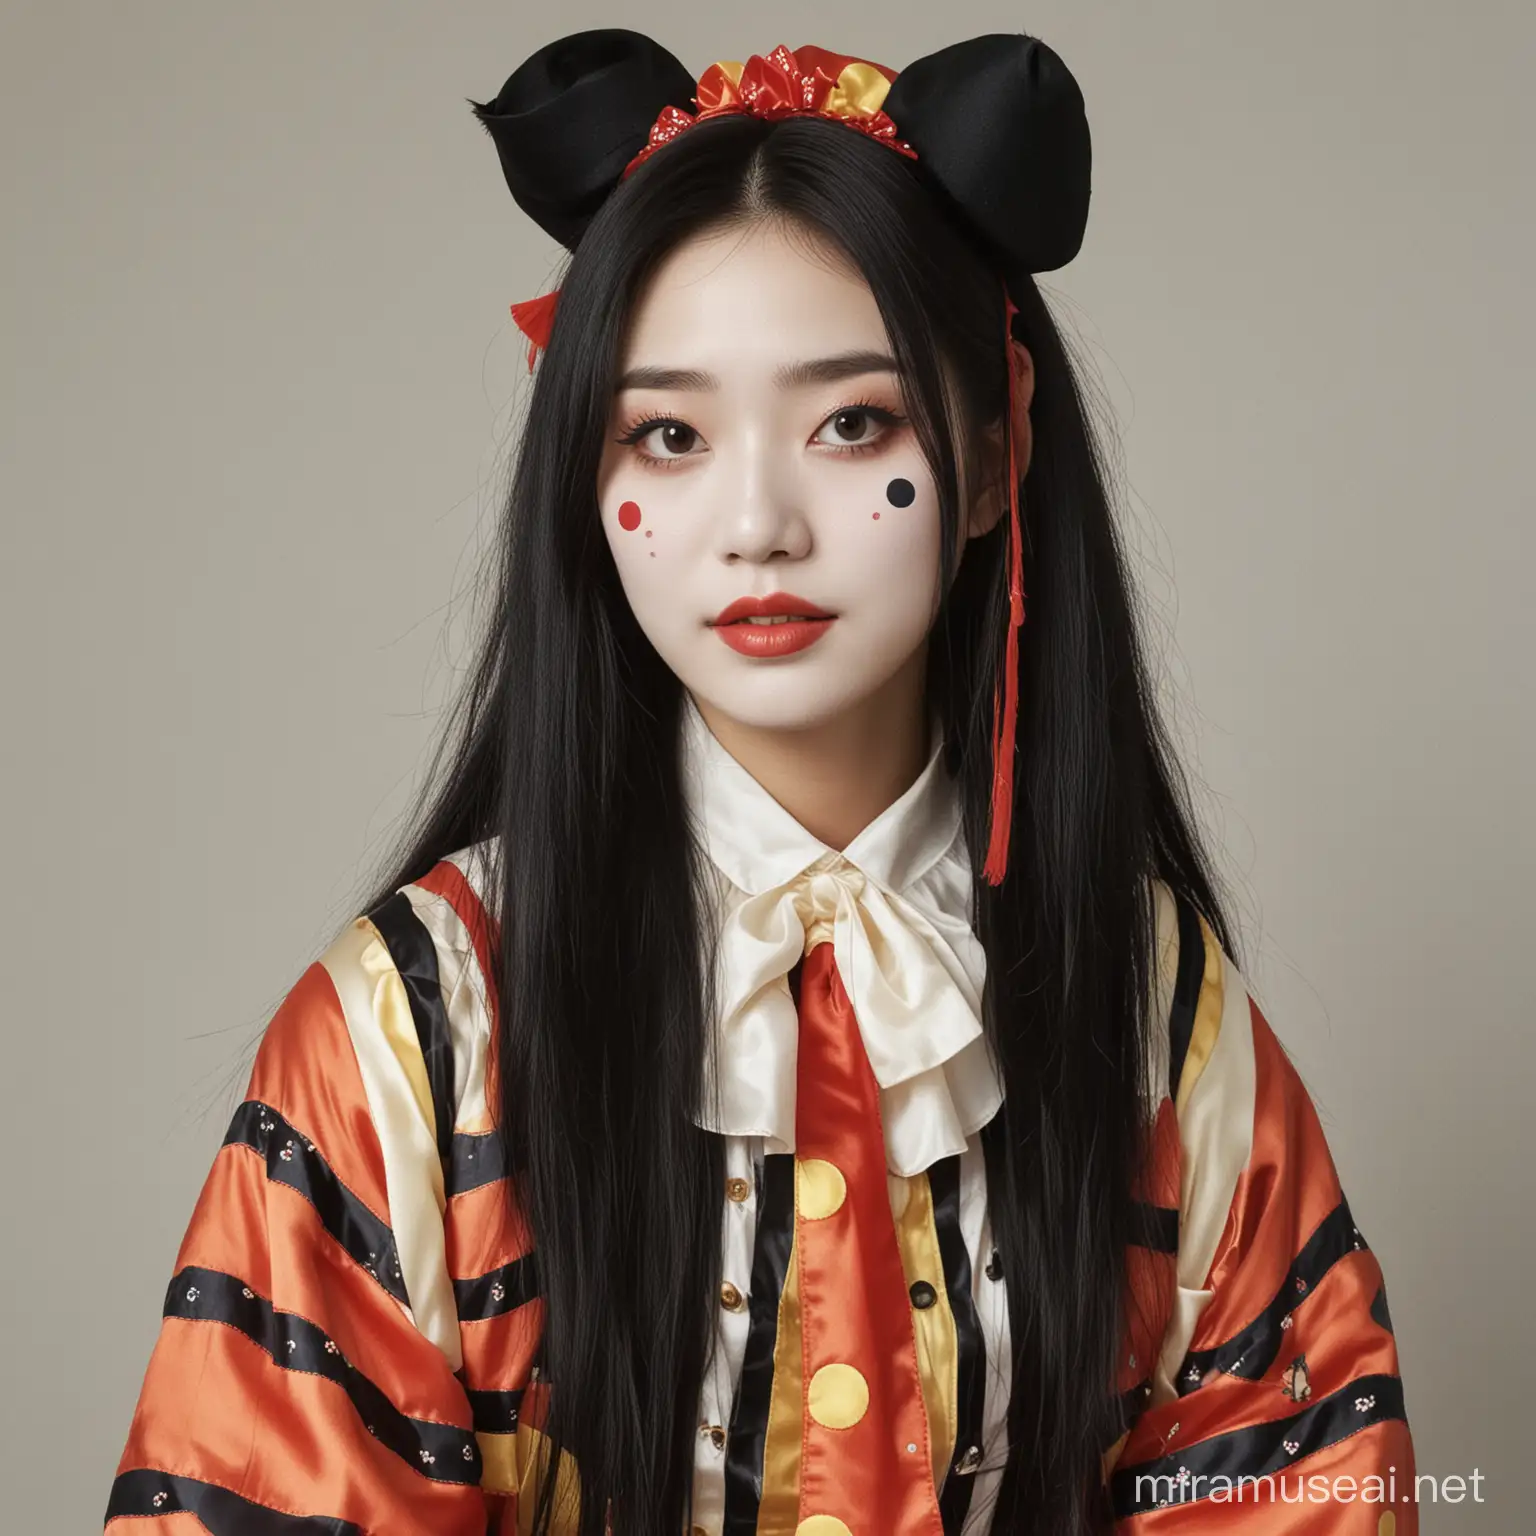 a Korean woman, 20 years old, with long black hair in a clown outfit